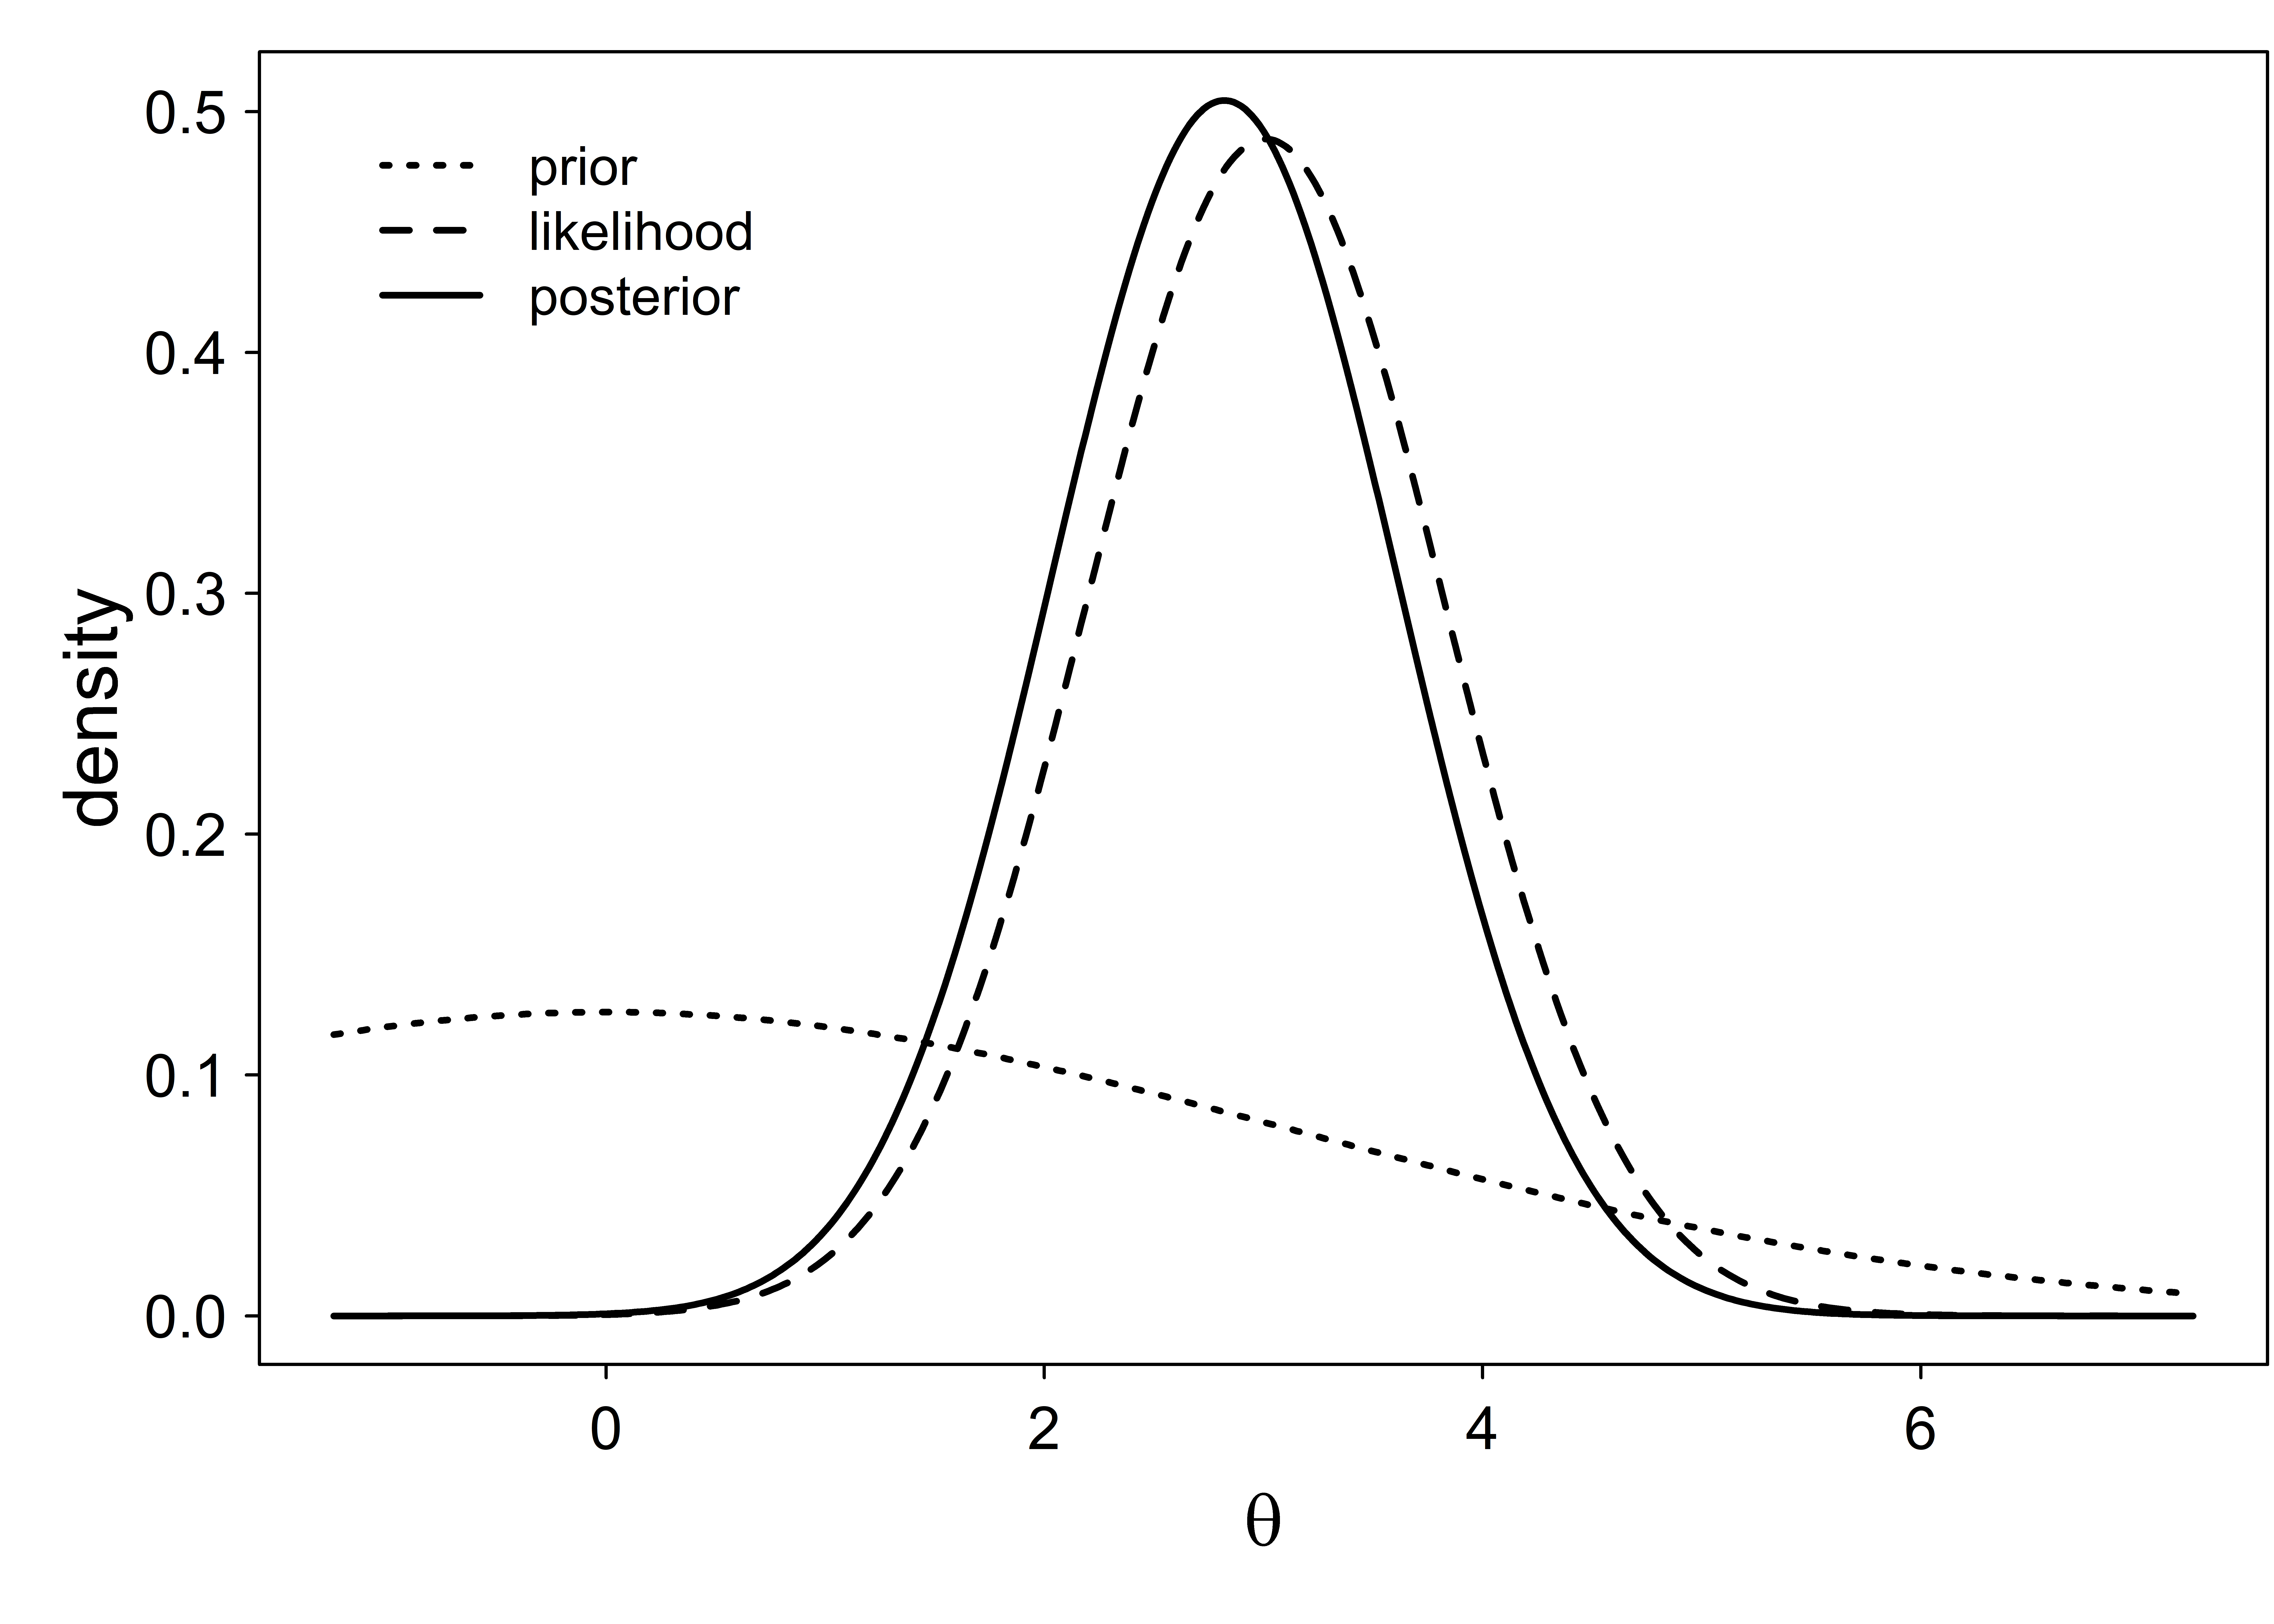 Hypothetical example showing the result of applying the Bayes theorem for obtaining a posterior distribution of a continuous parameter. The likelhood is defined by the data and the model, the prior is expressing the knowledge about the parameter before looking at the data. Combining the two distributions using the Bayes theorem results in the posterior distribution.